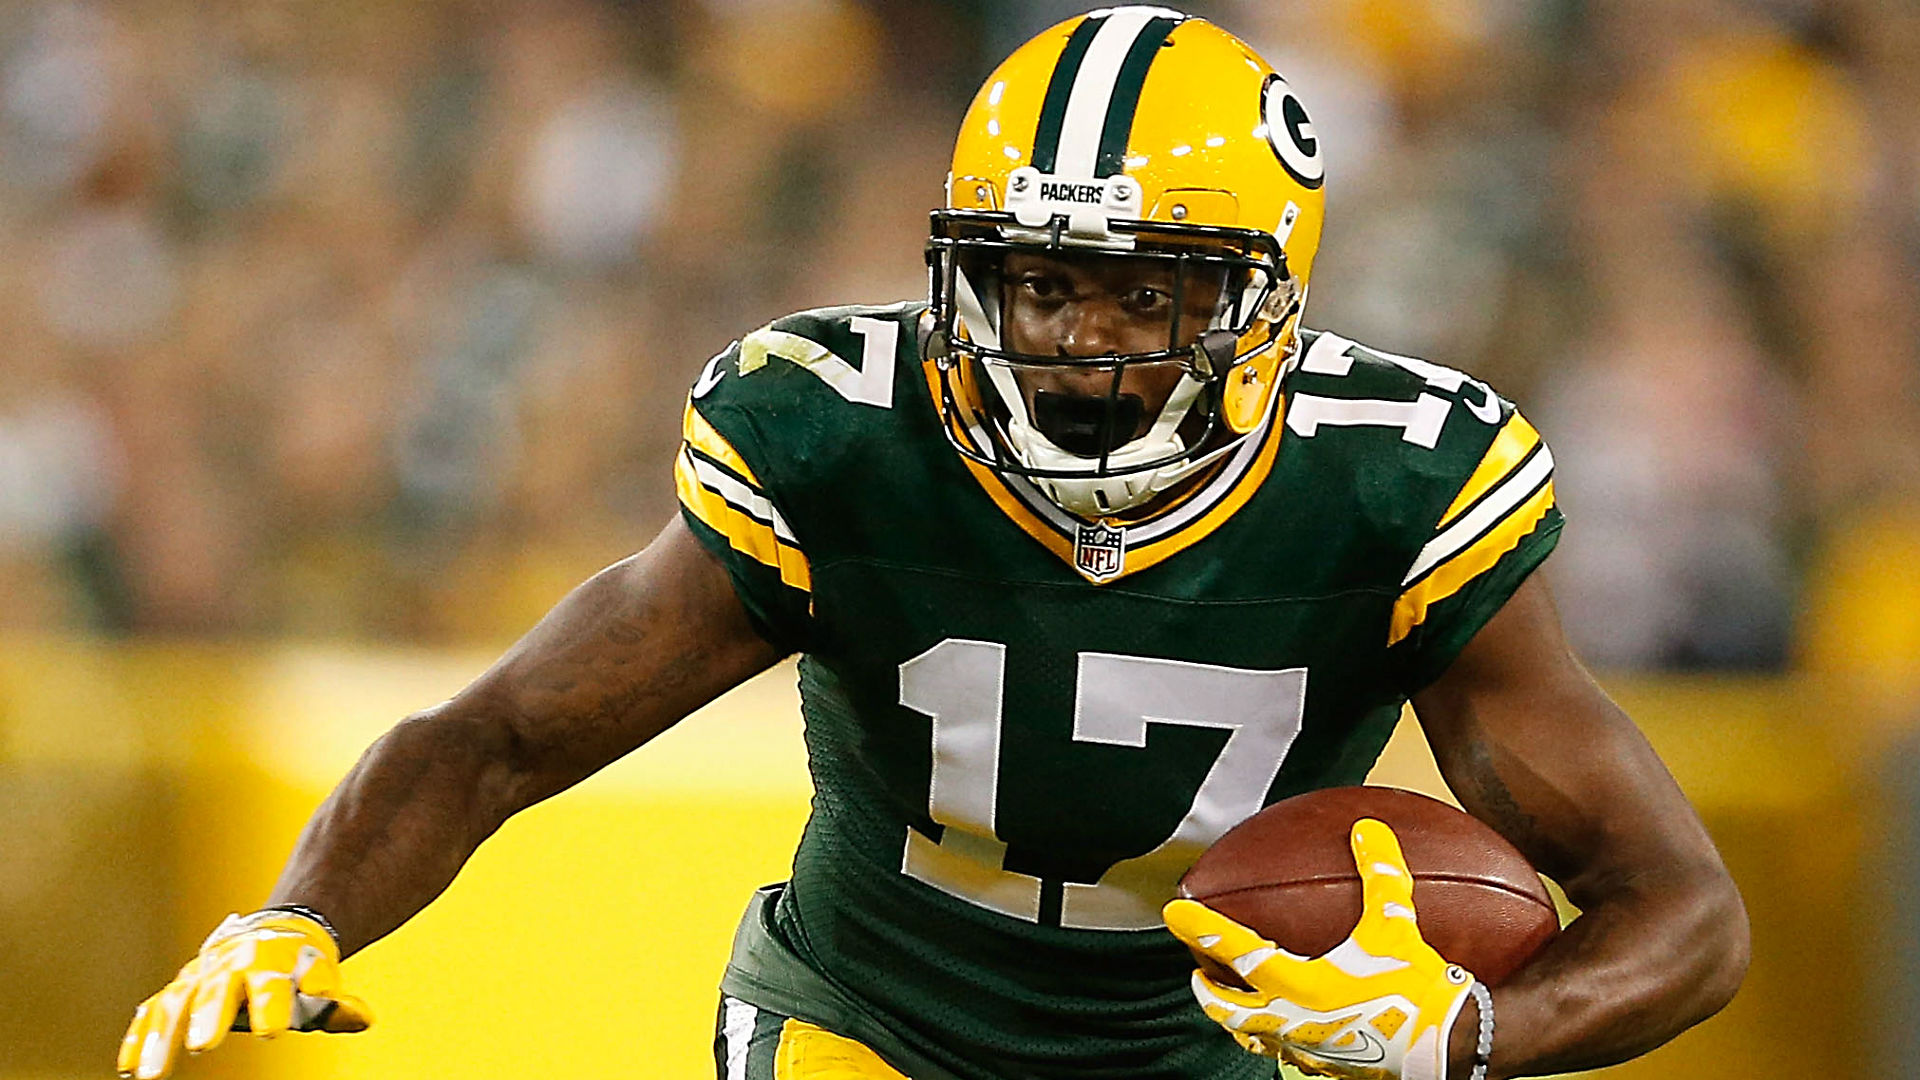 Packers Wr Davante Adams Could Miss Some Time With Ankle